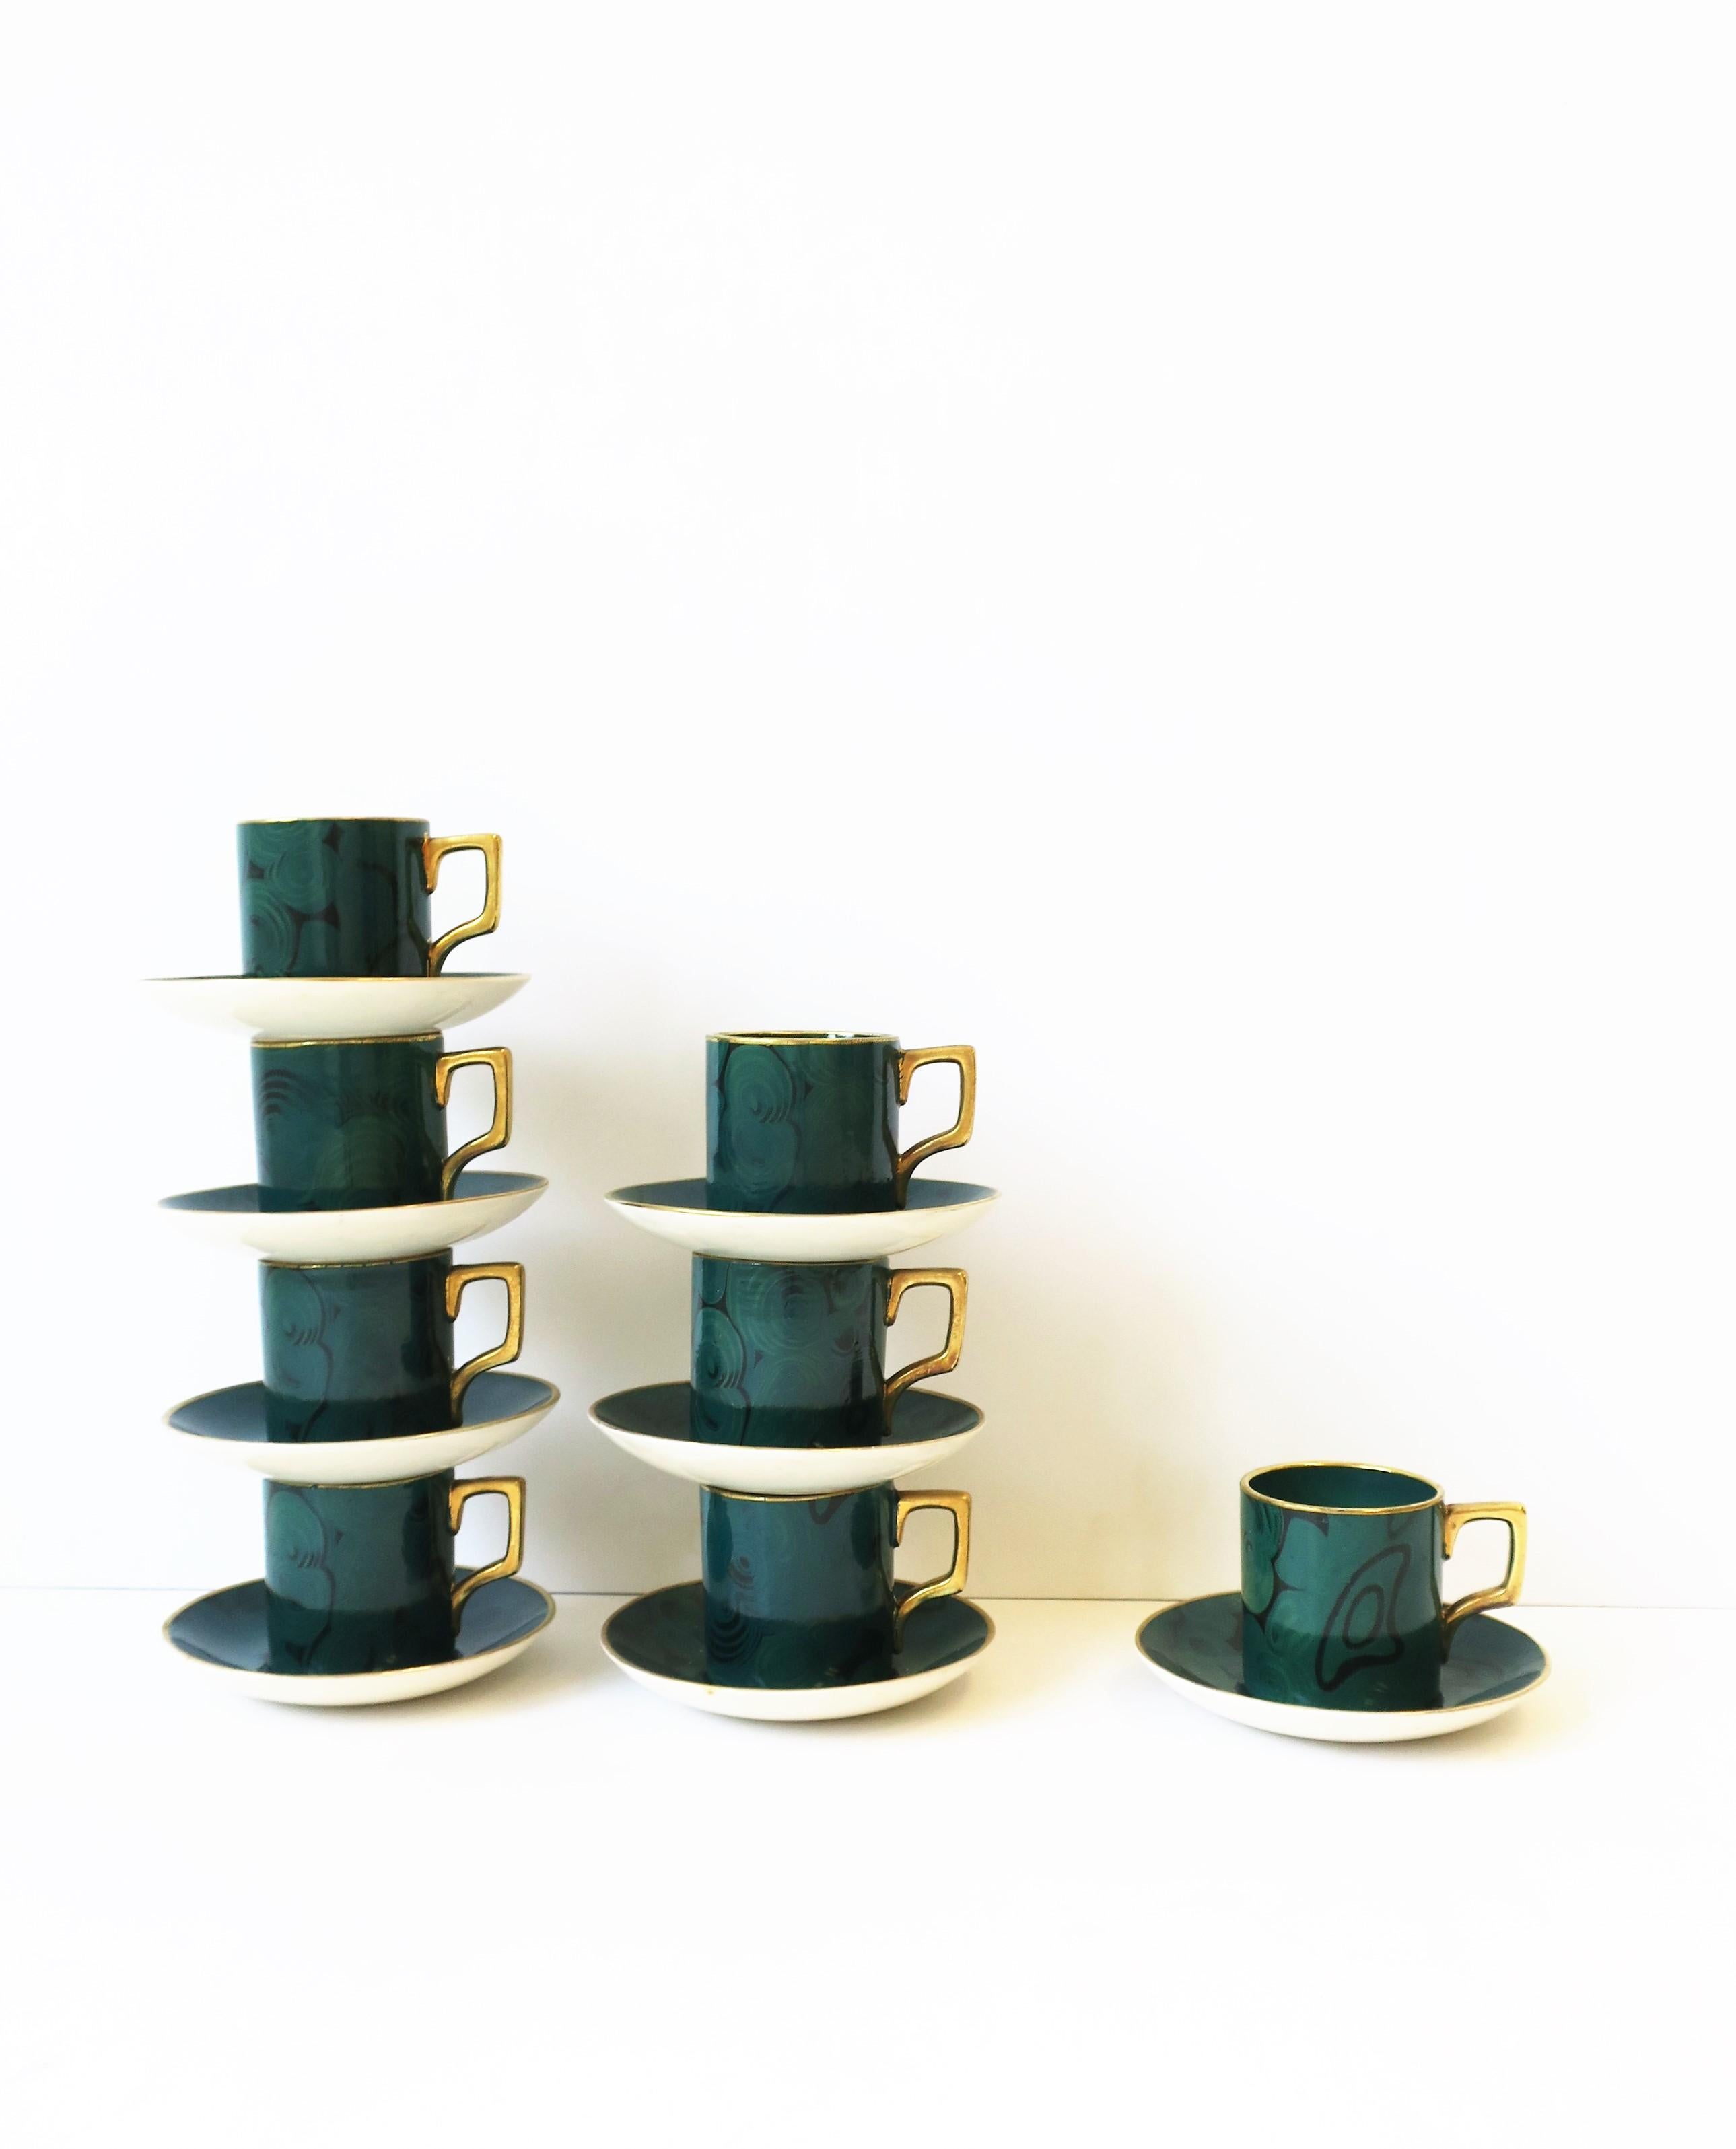 Malachite Pottery Espresso Coffee and Tea Demitasse Susan Williams-Ellis English In Good Condition For Sale In New York, NY